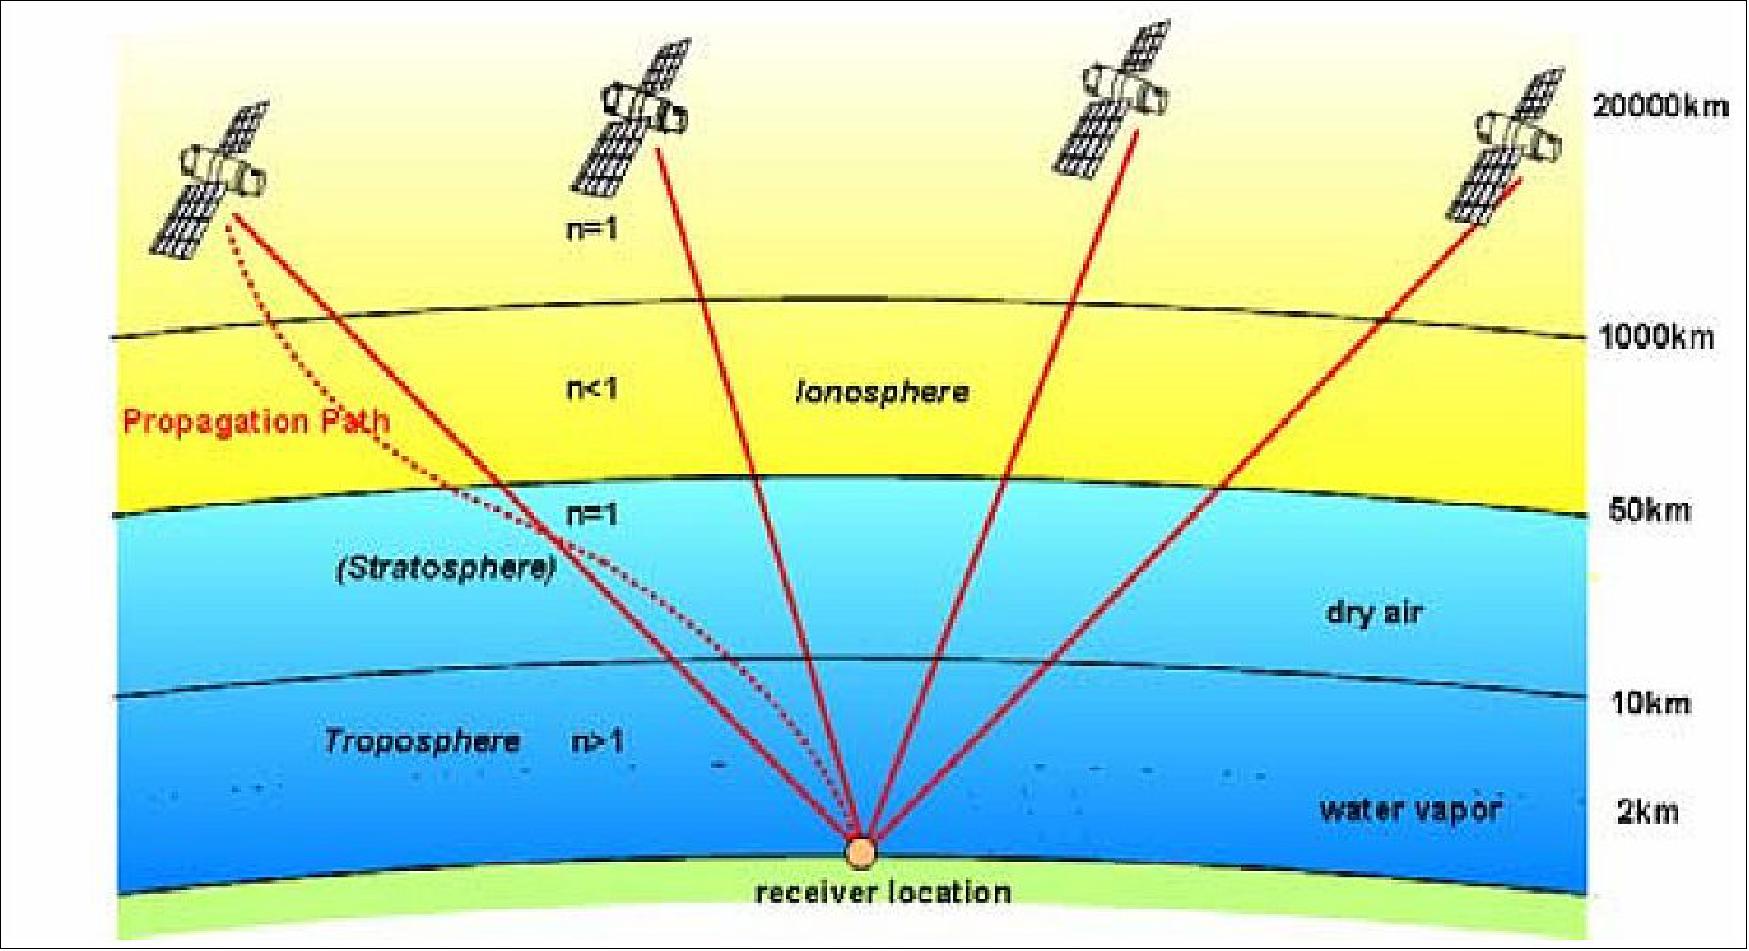 Figure 1: Structure of the atmosphere and influence on propagation path (image credit: DLR)